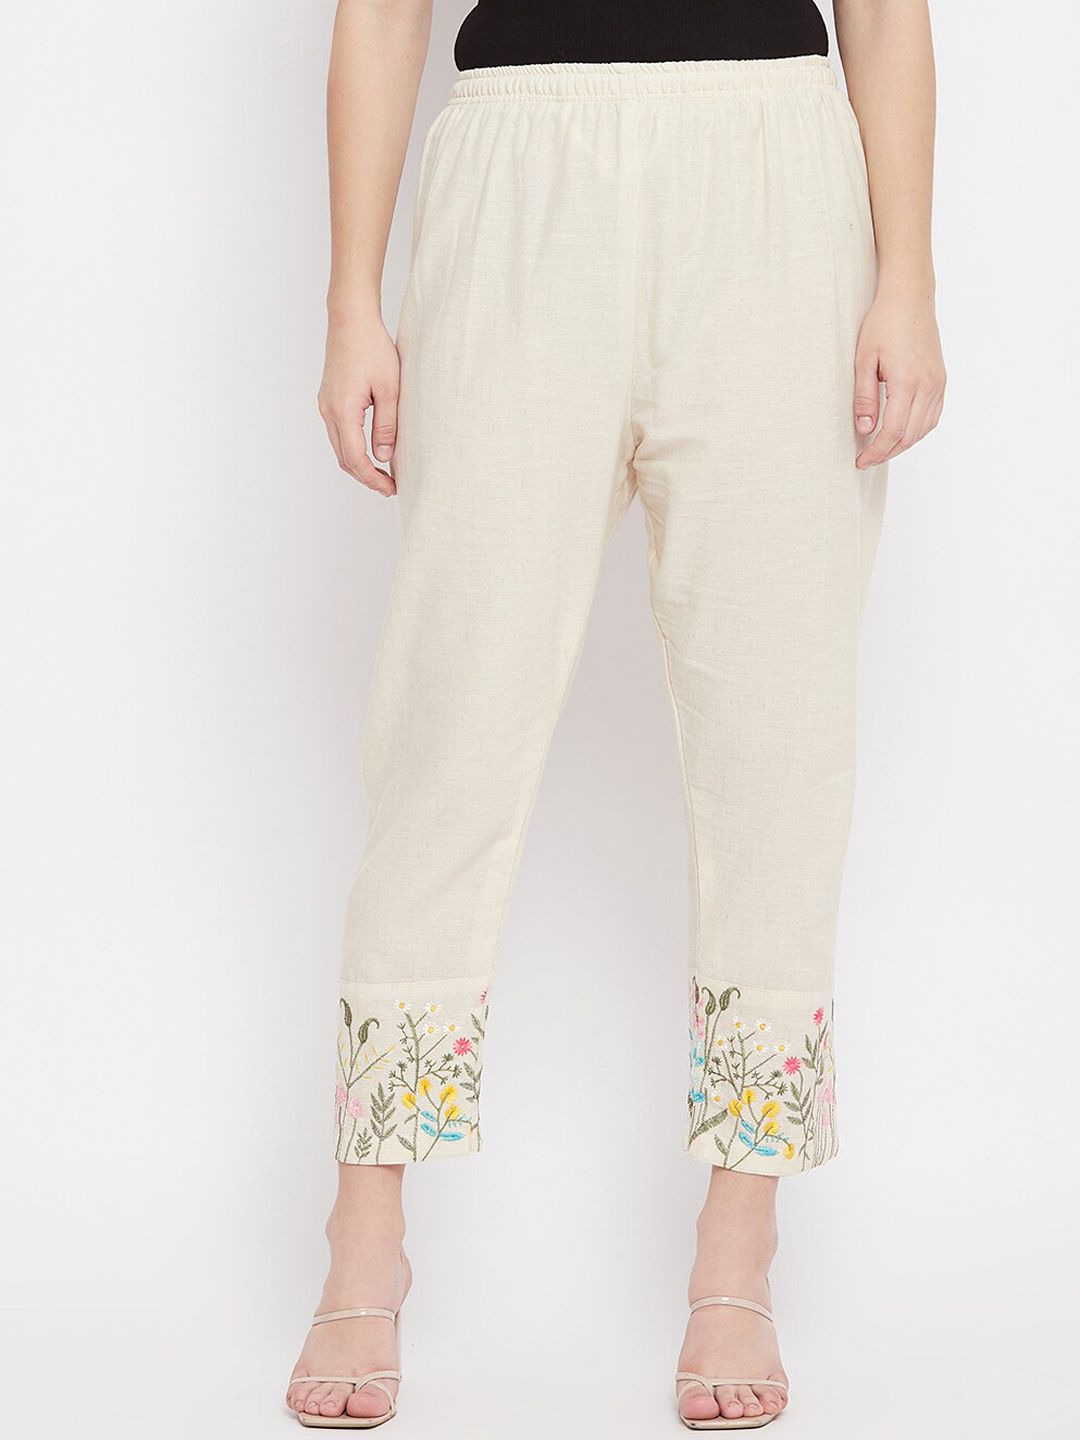 Clora Creation Women Beige Floral Embroidered Cotton Trousers Price in India